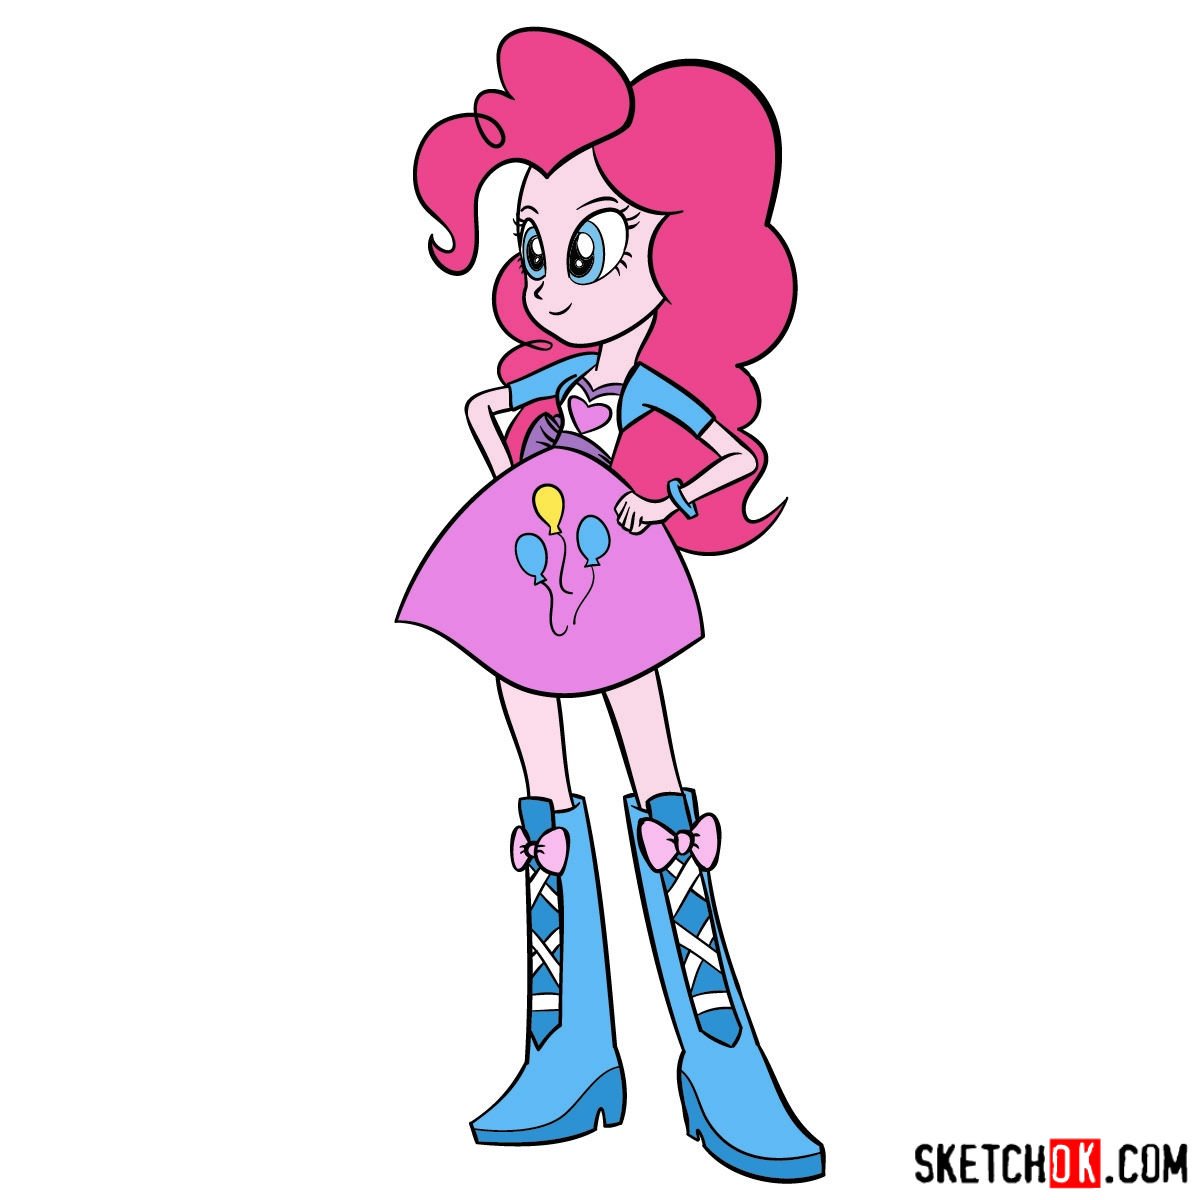 How to draw human Pinkie Pie | Equestria - Sketchok easy drawing guides